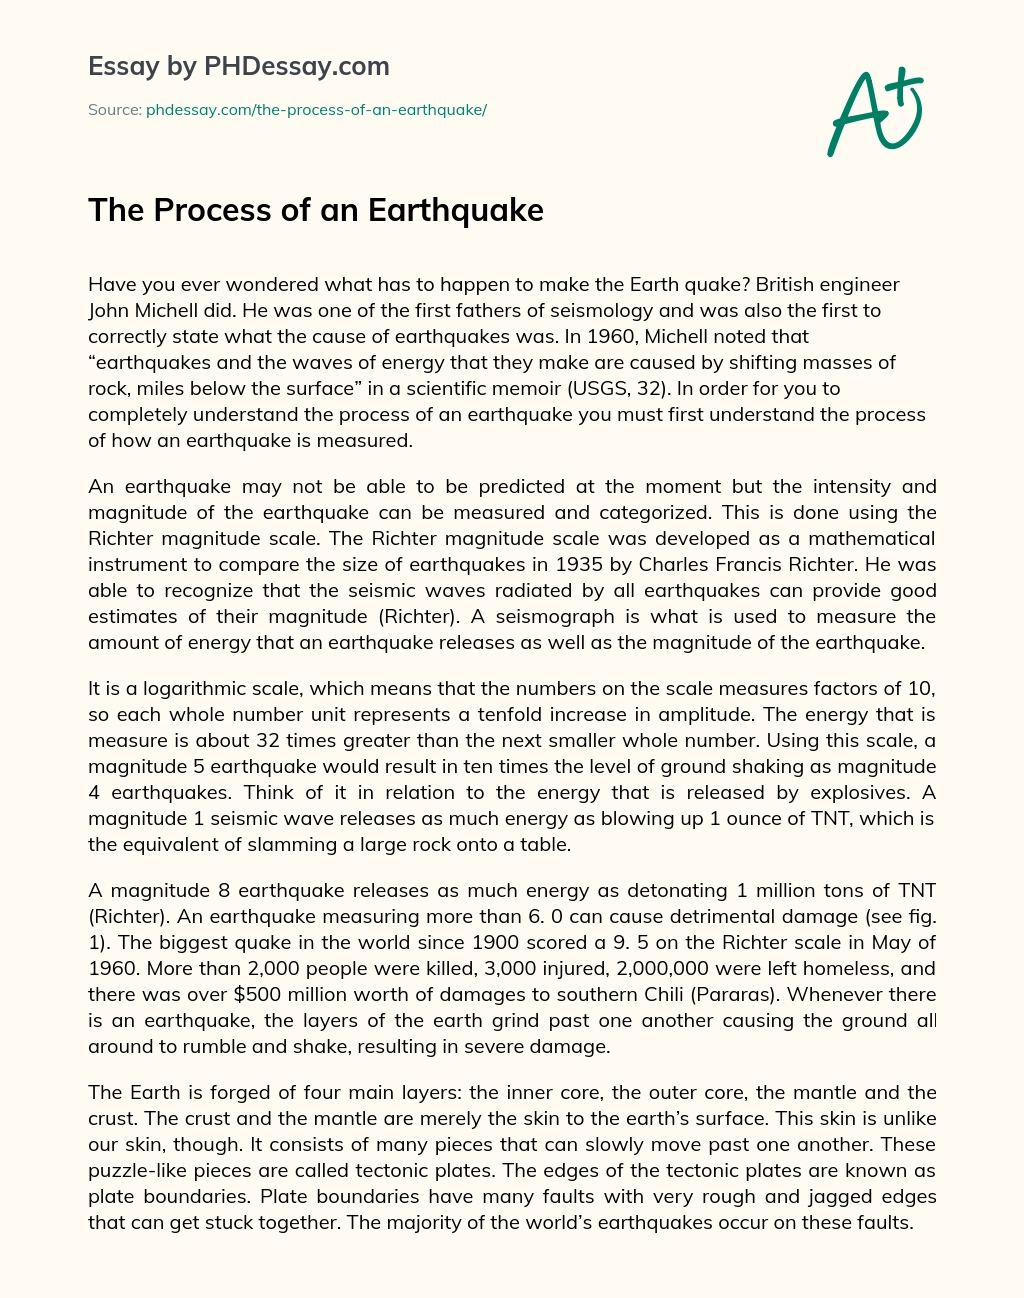 The Process of an Earthquake essay